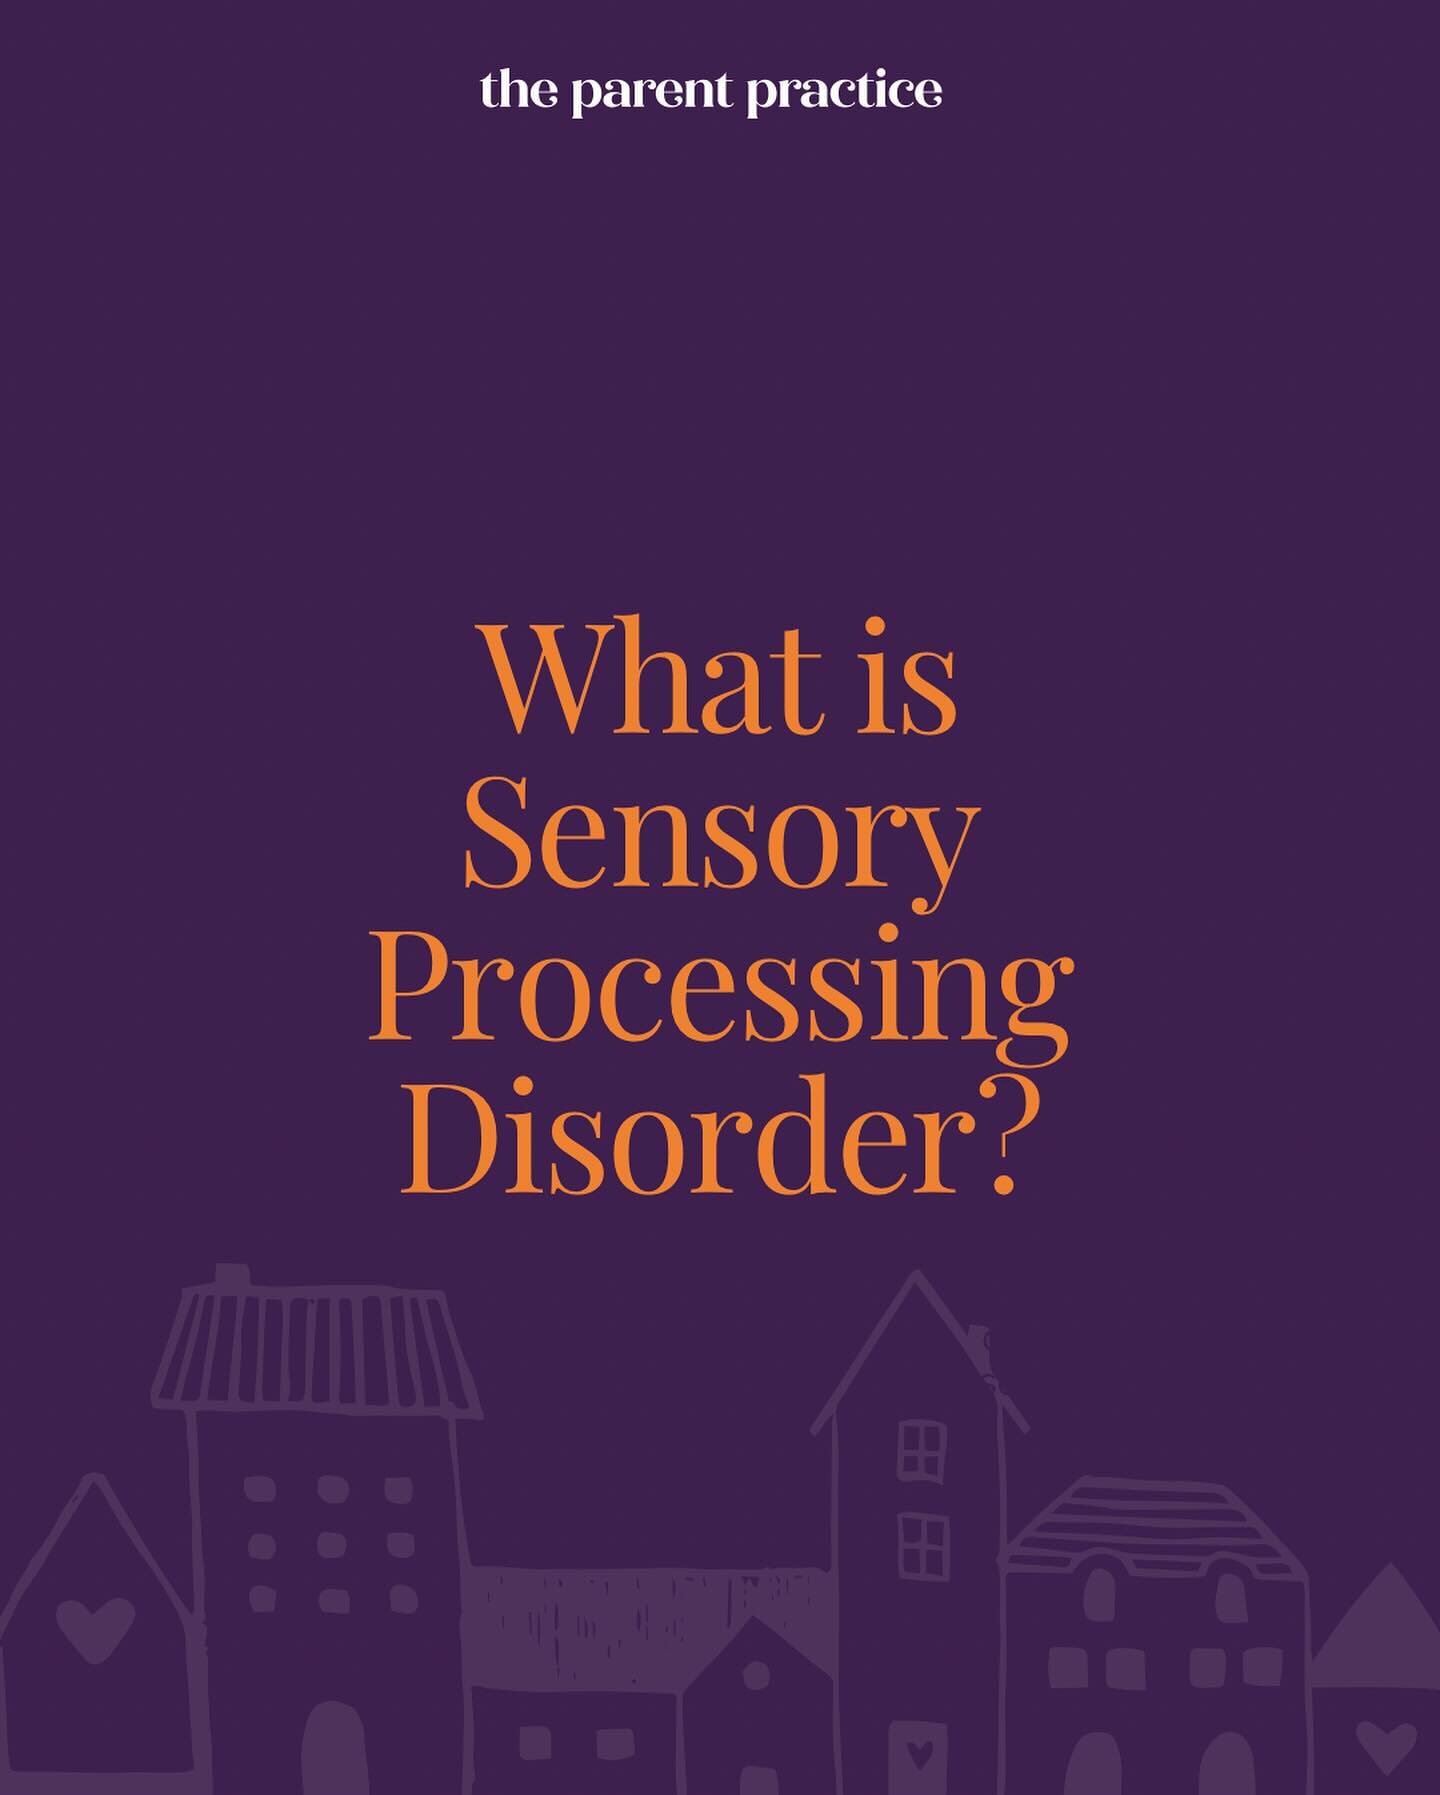 Ever wondered what SPD (Sensory Processing Disorder) really means?

SPD manifests in two main ways: oversensitivity and undersensitivity. 💡

🔍 Oversensitivity: Kids can become easily overwhelmed by sensory information, leading to sensory avoidance.